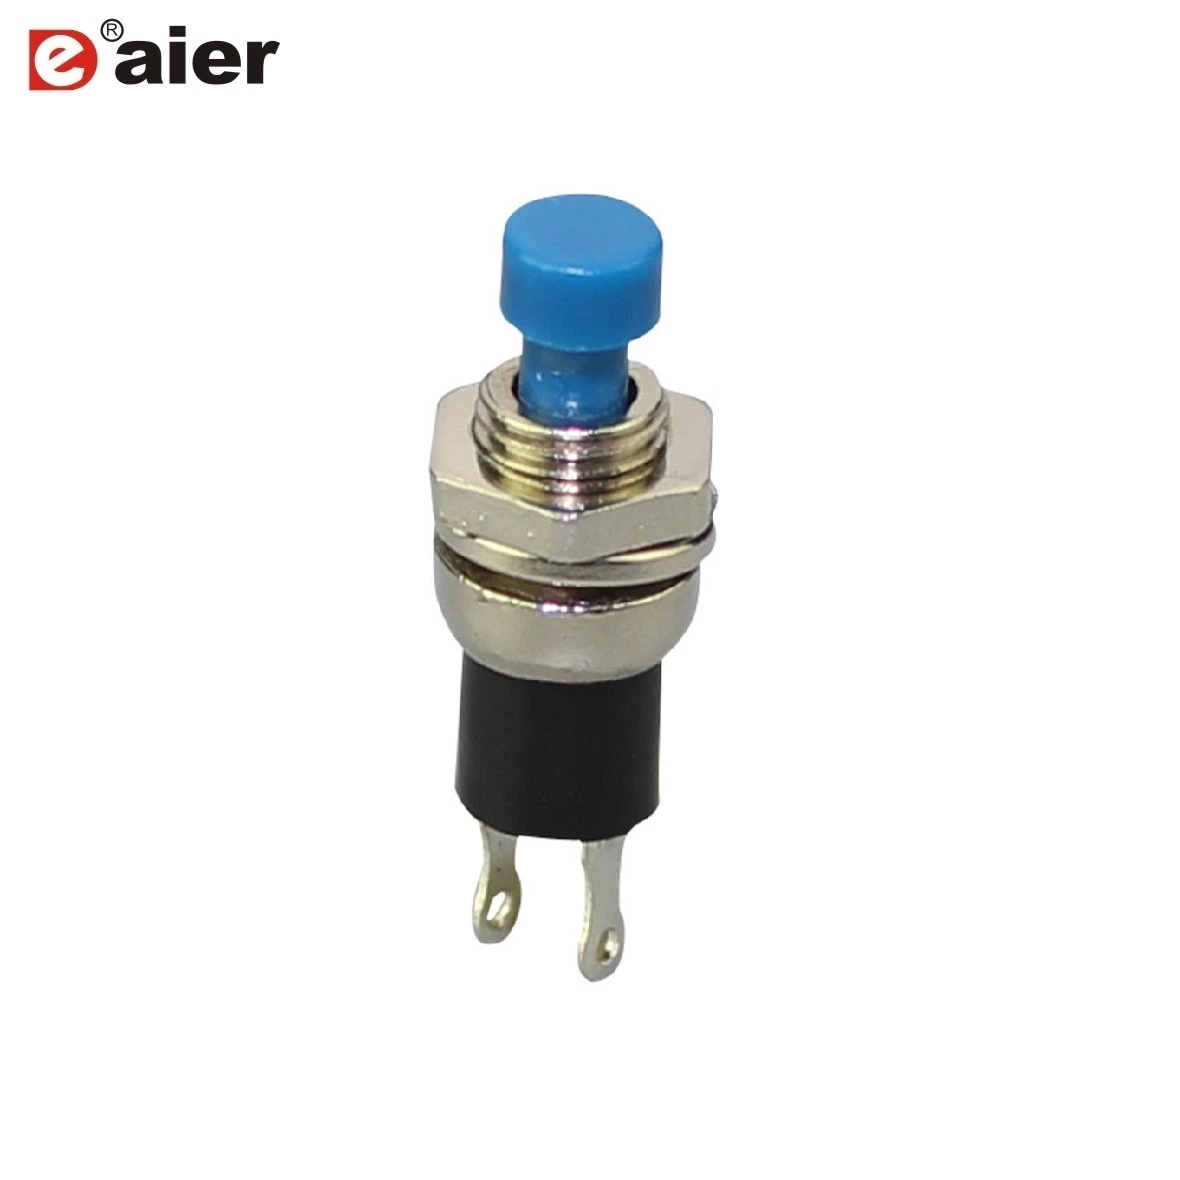 Kax-3 Spst 2 Pin Normally Open off Momentary on Push Button Switch